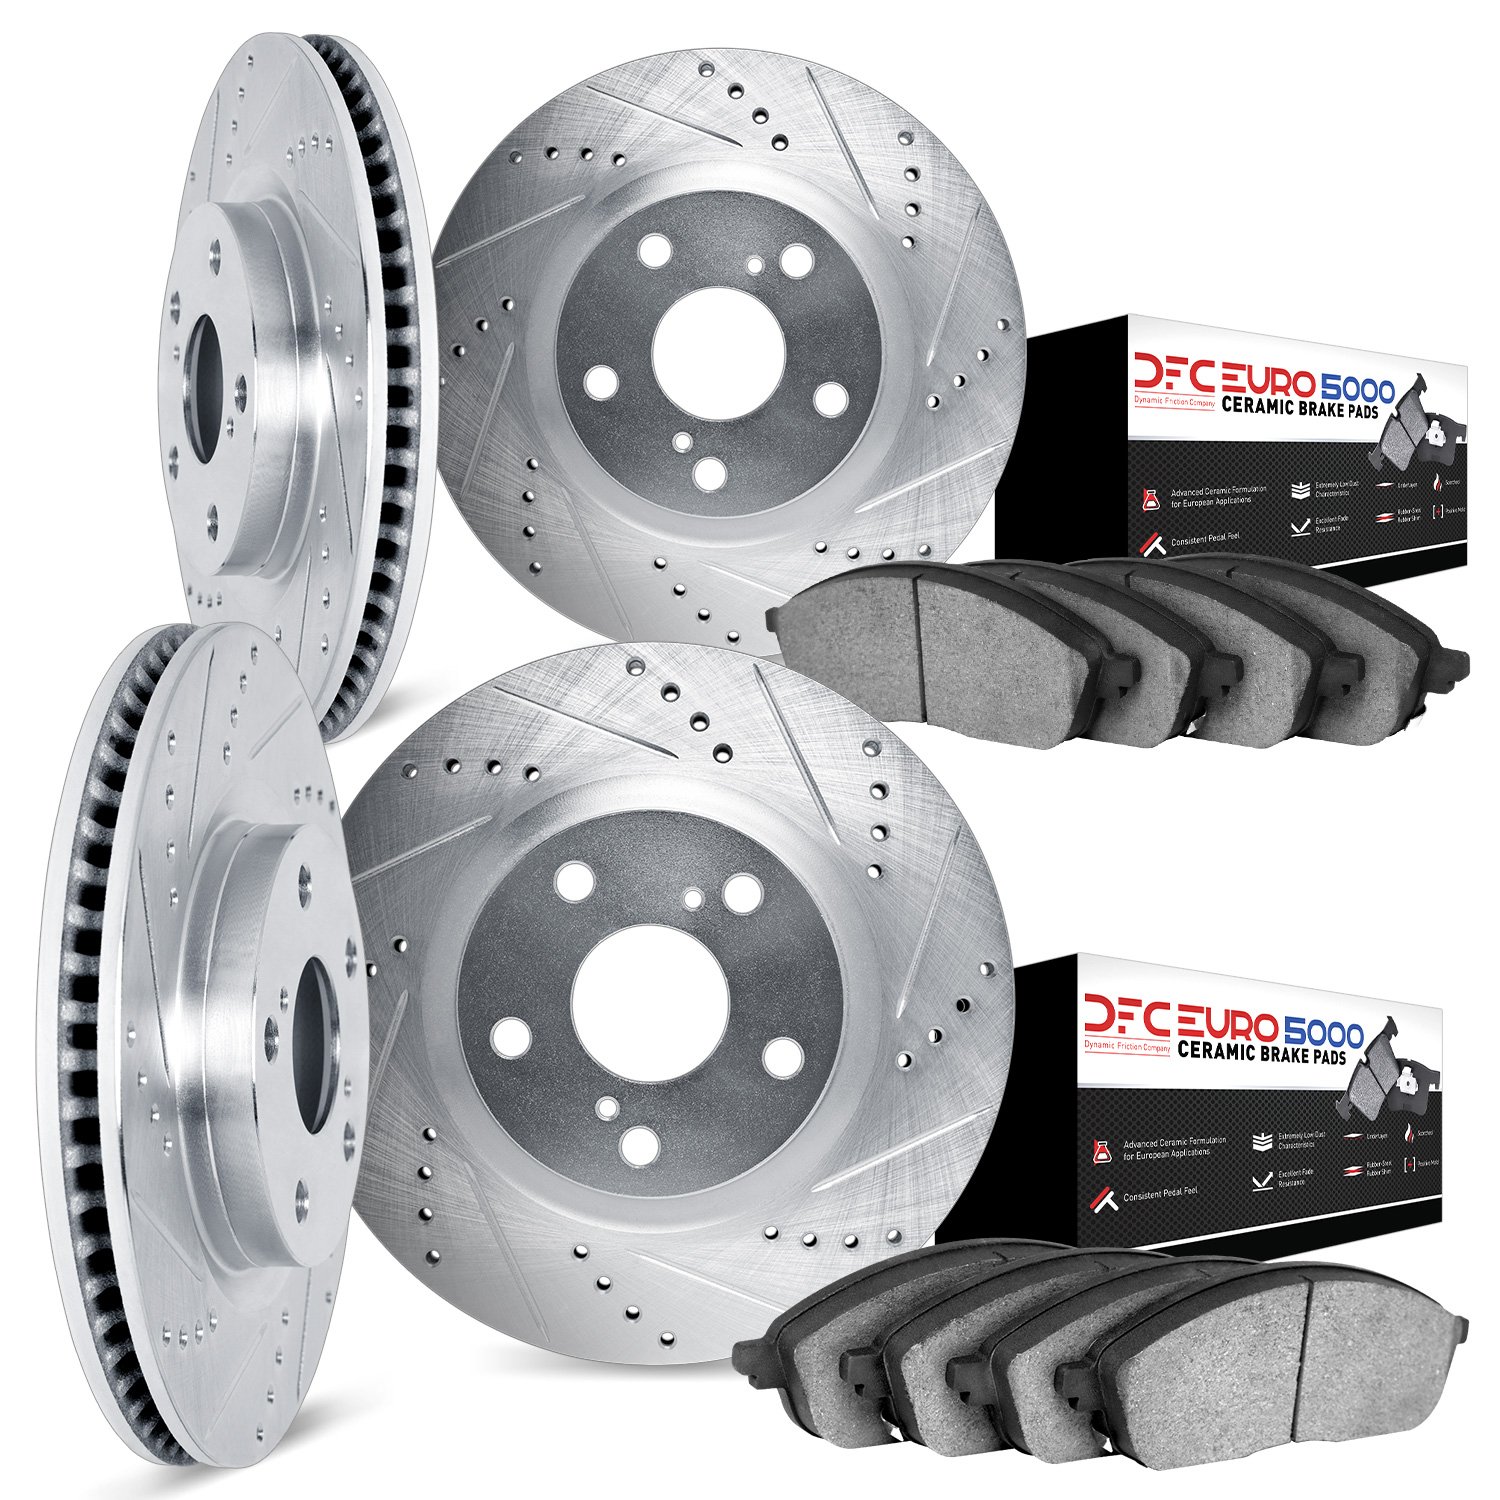 7604-31021 Drilled/Slotted Brake Rotors w/5000 Euro Ceramic Brake Pads Kit [Silver], 2008-2013 BMW, Position: Front and Rear